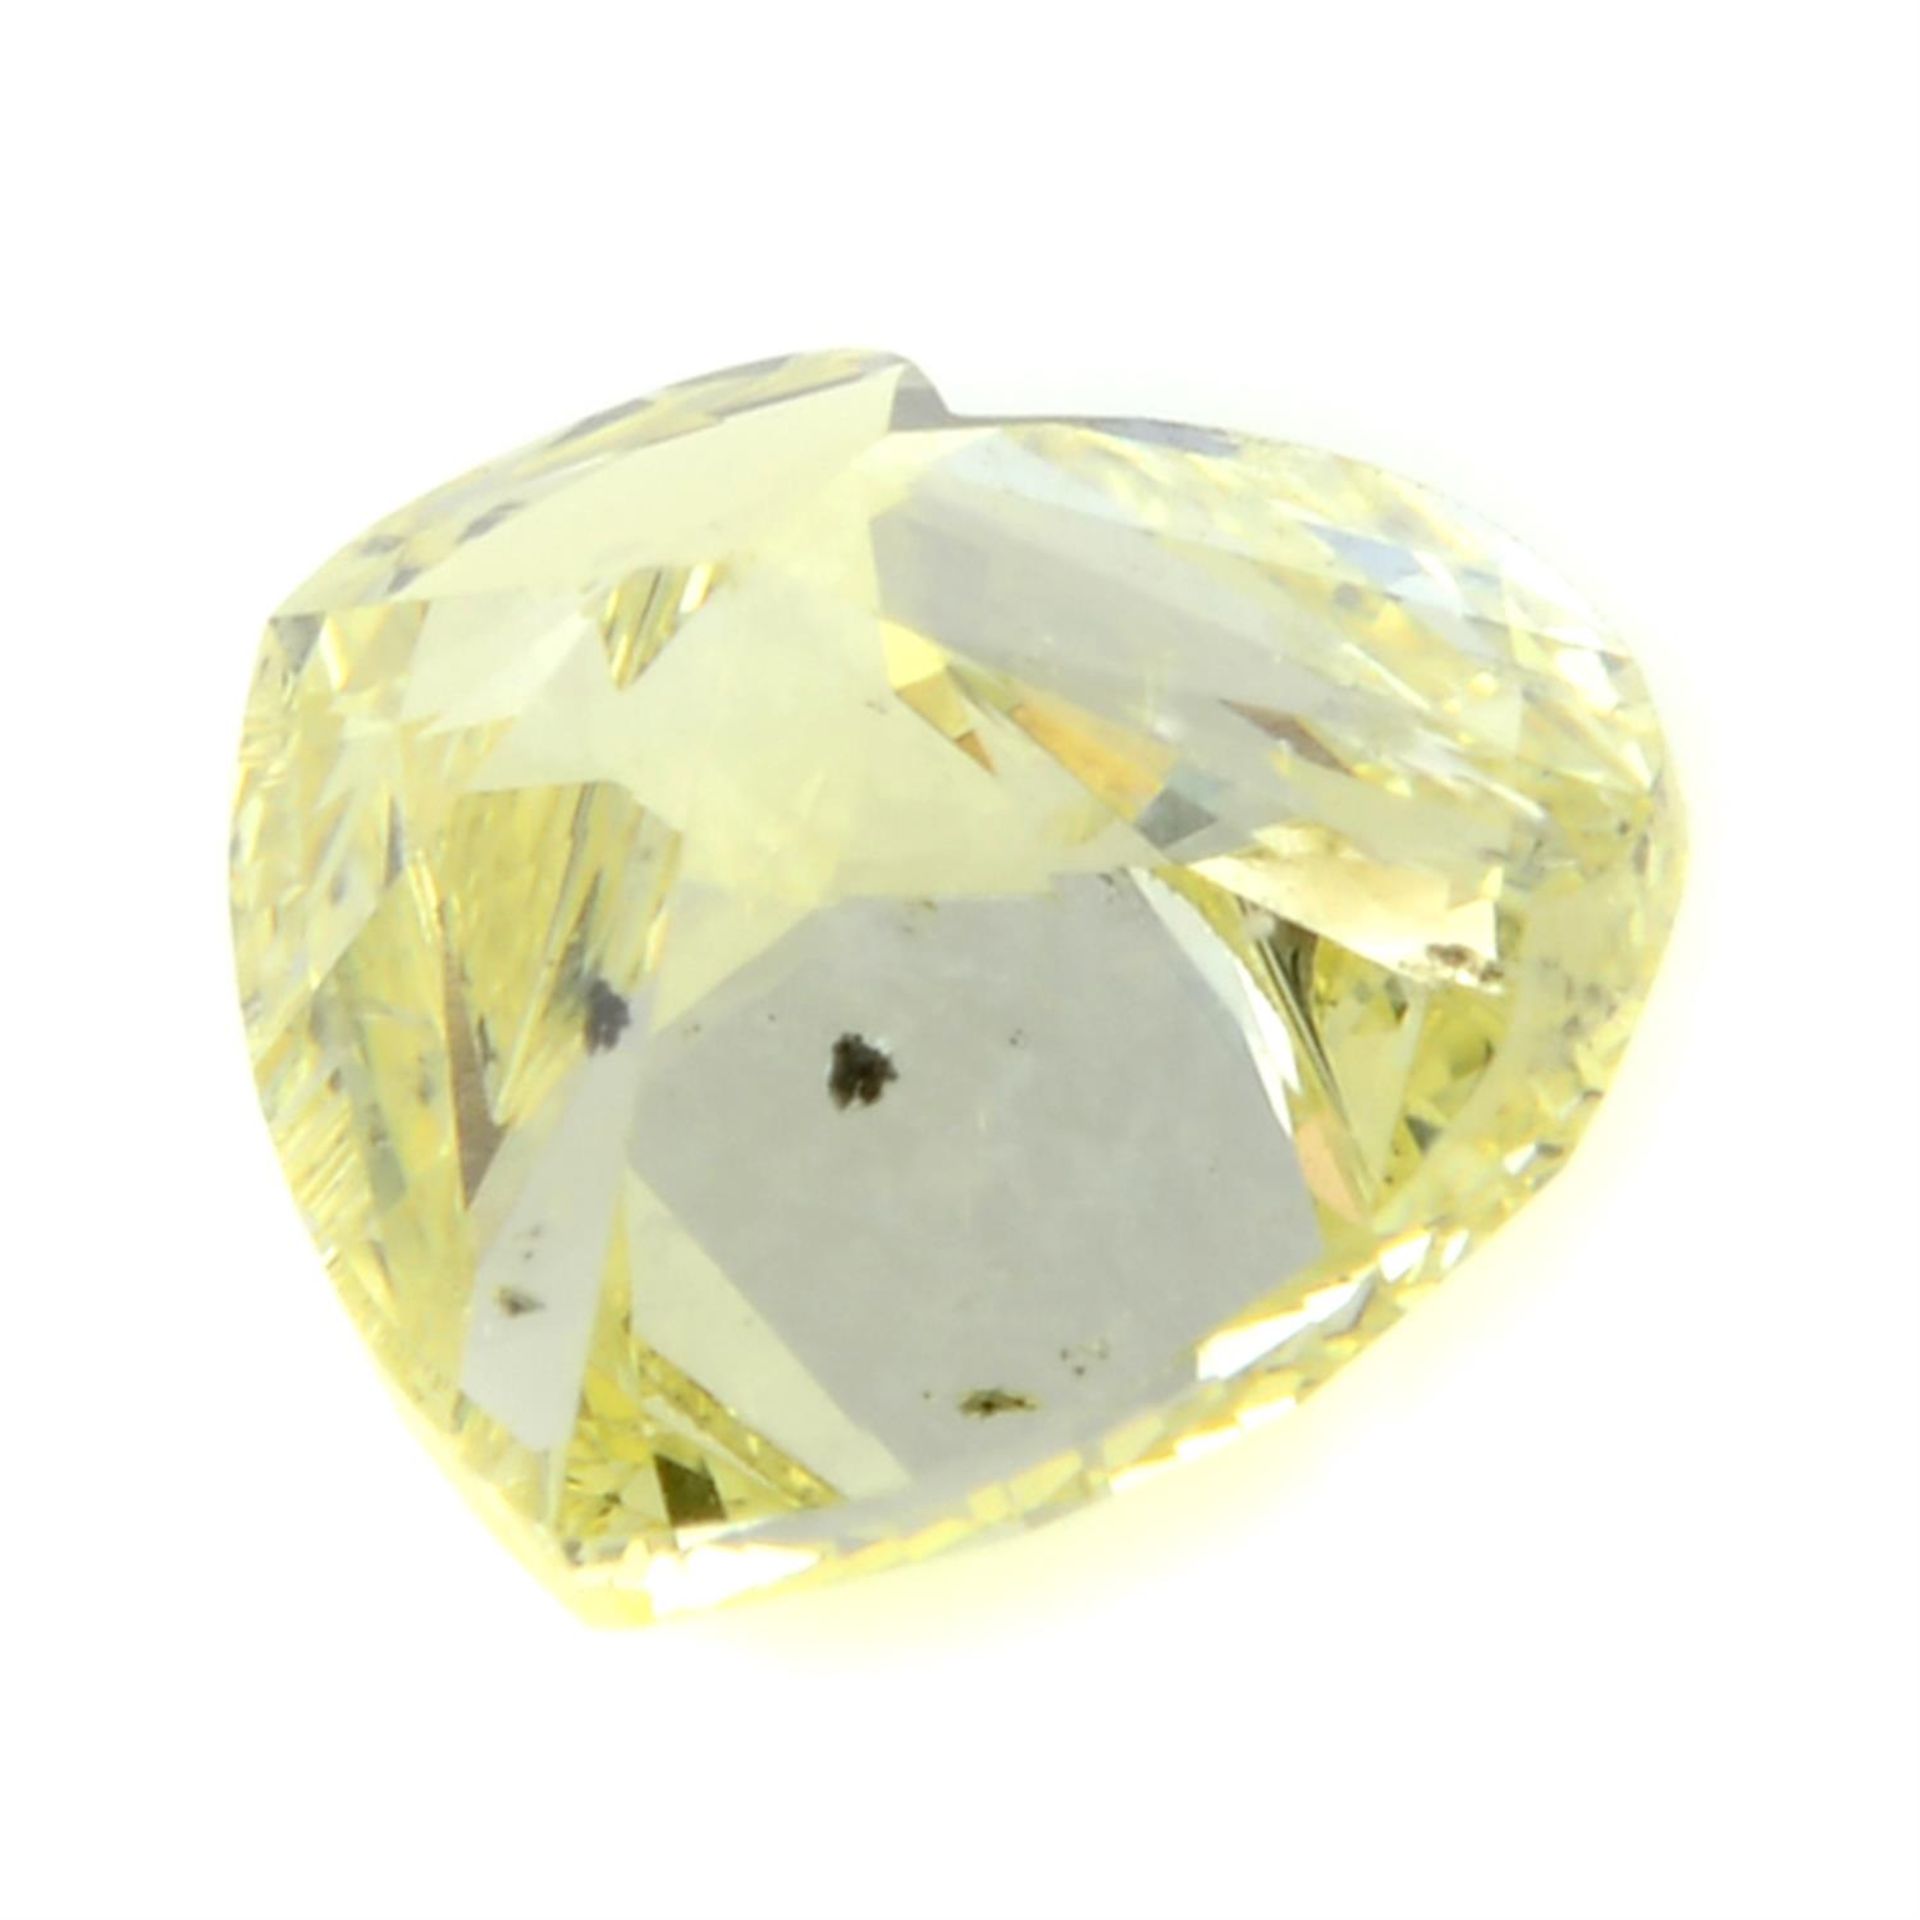 A heart shape natural fancy yellow diamond, weighing 0.50ct - Image 2 of 3